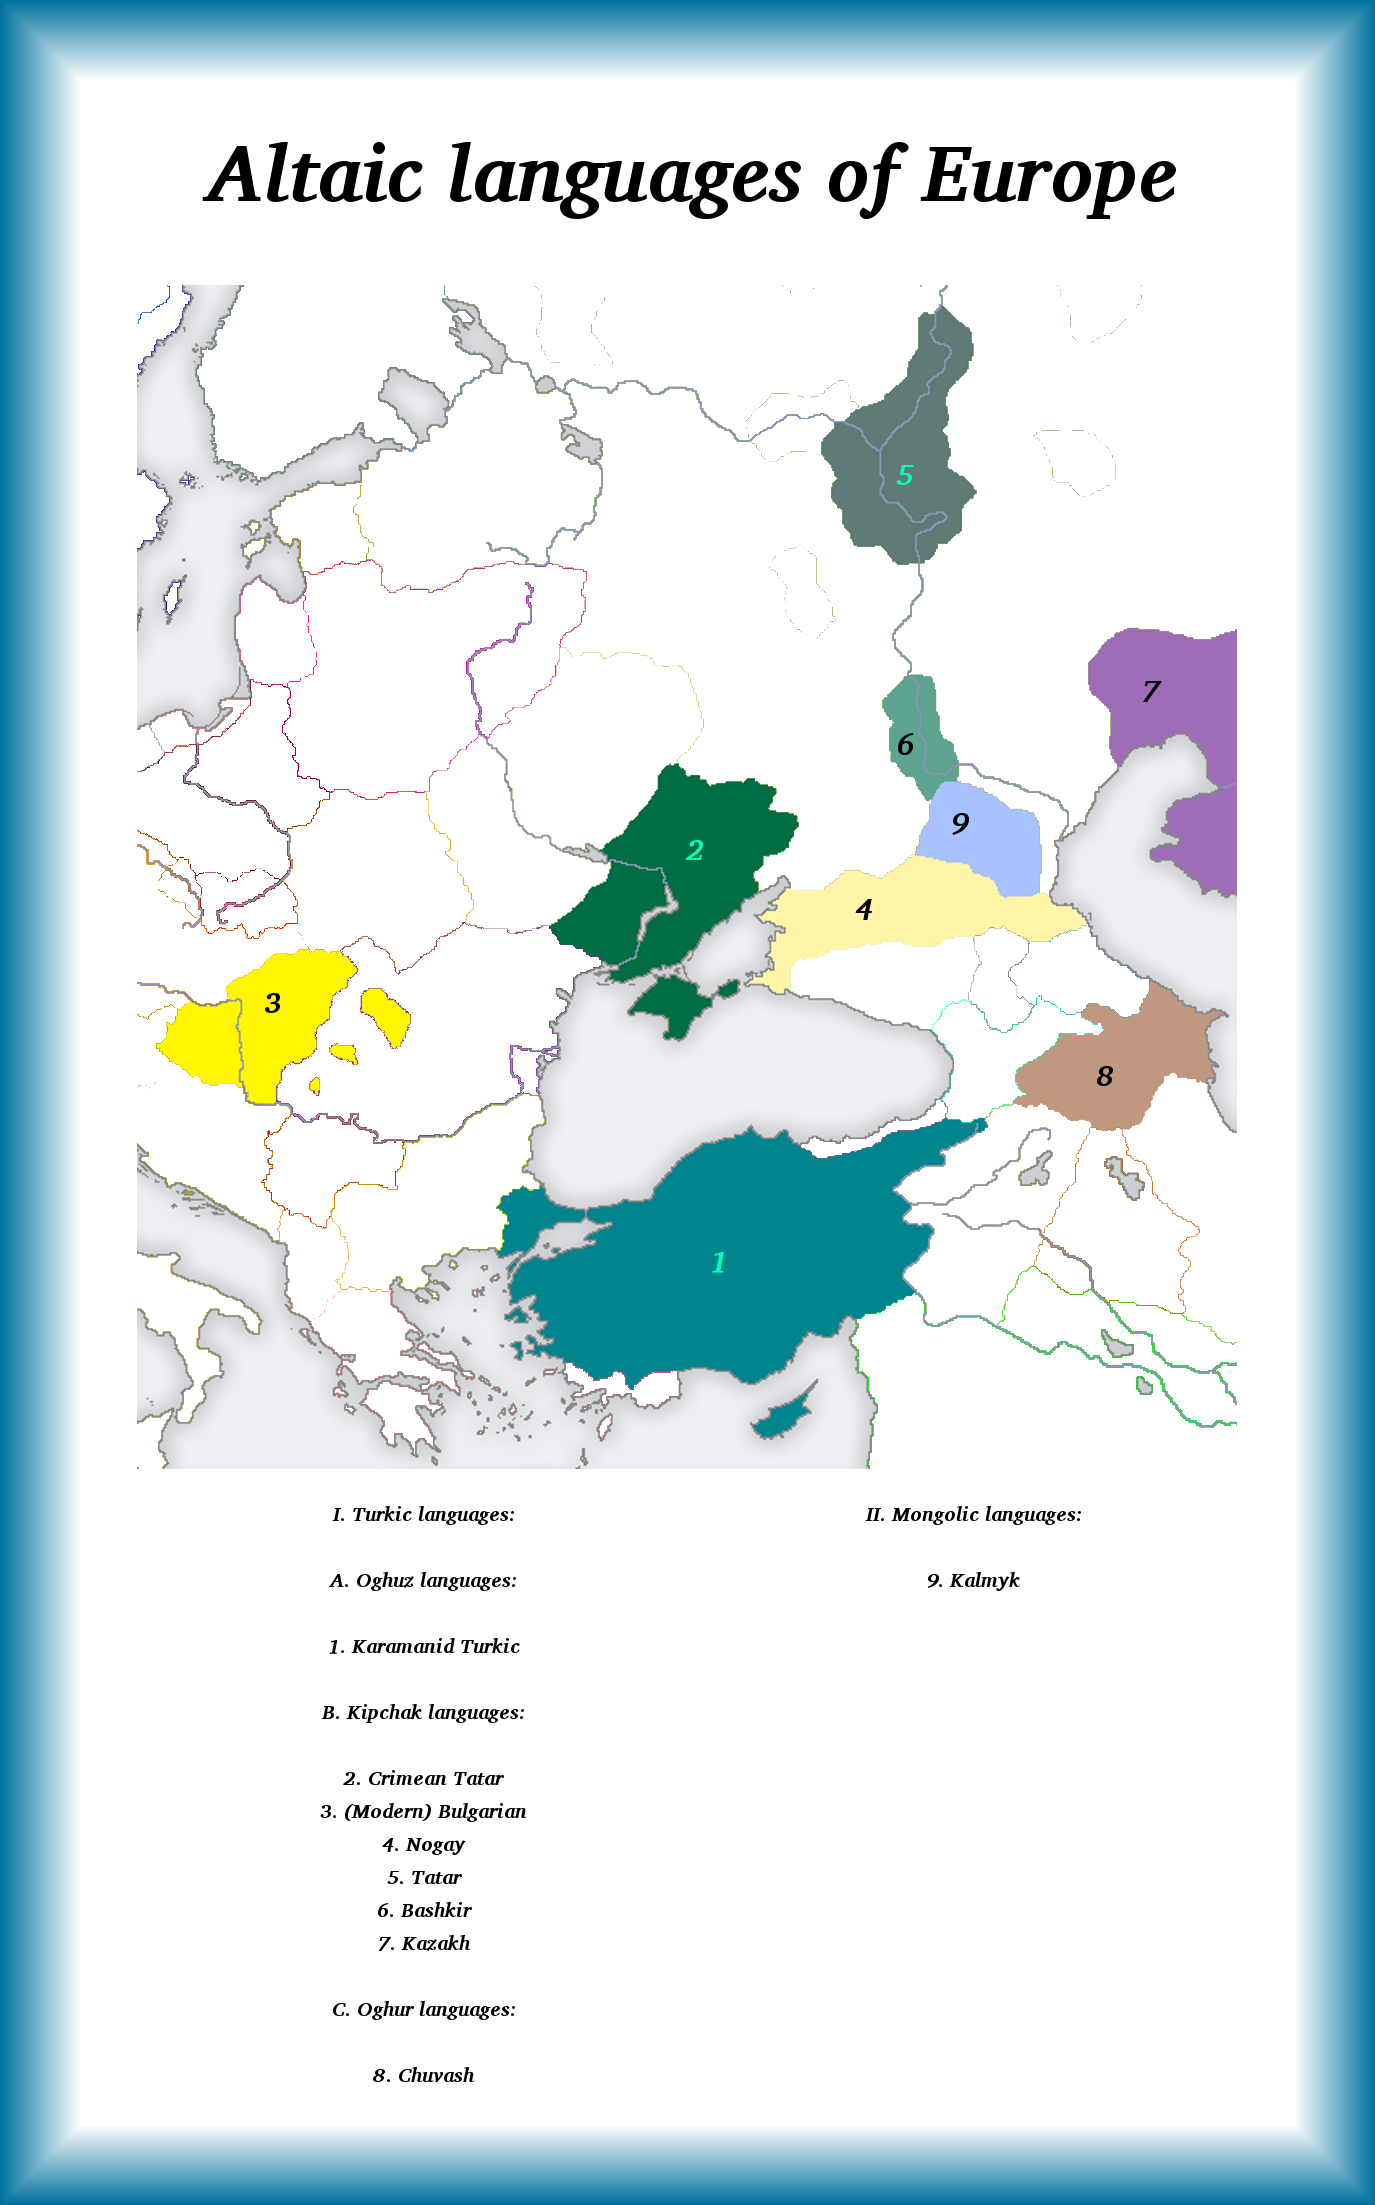 ere_collapsed___altaic_languages_of_europe_by_artaxes2-d6mamcv.png